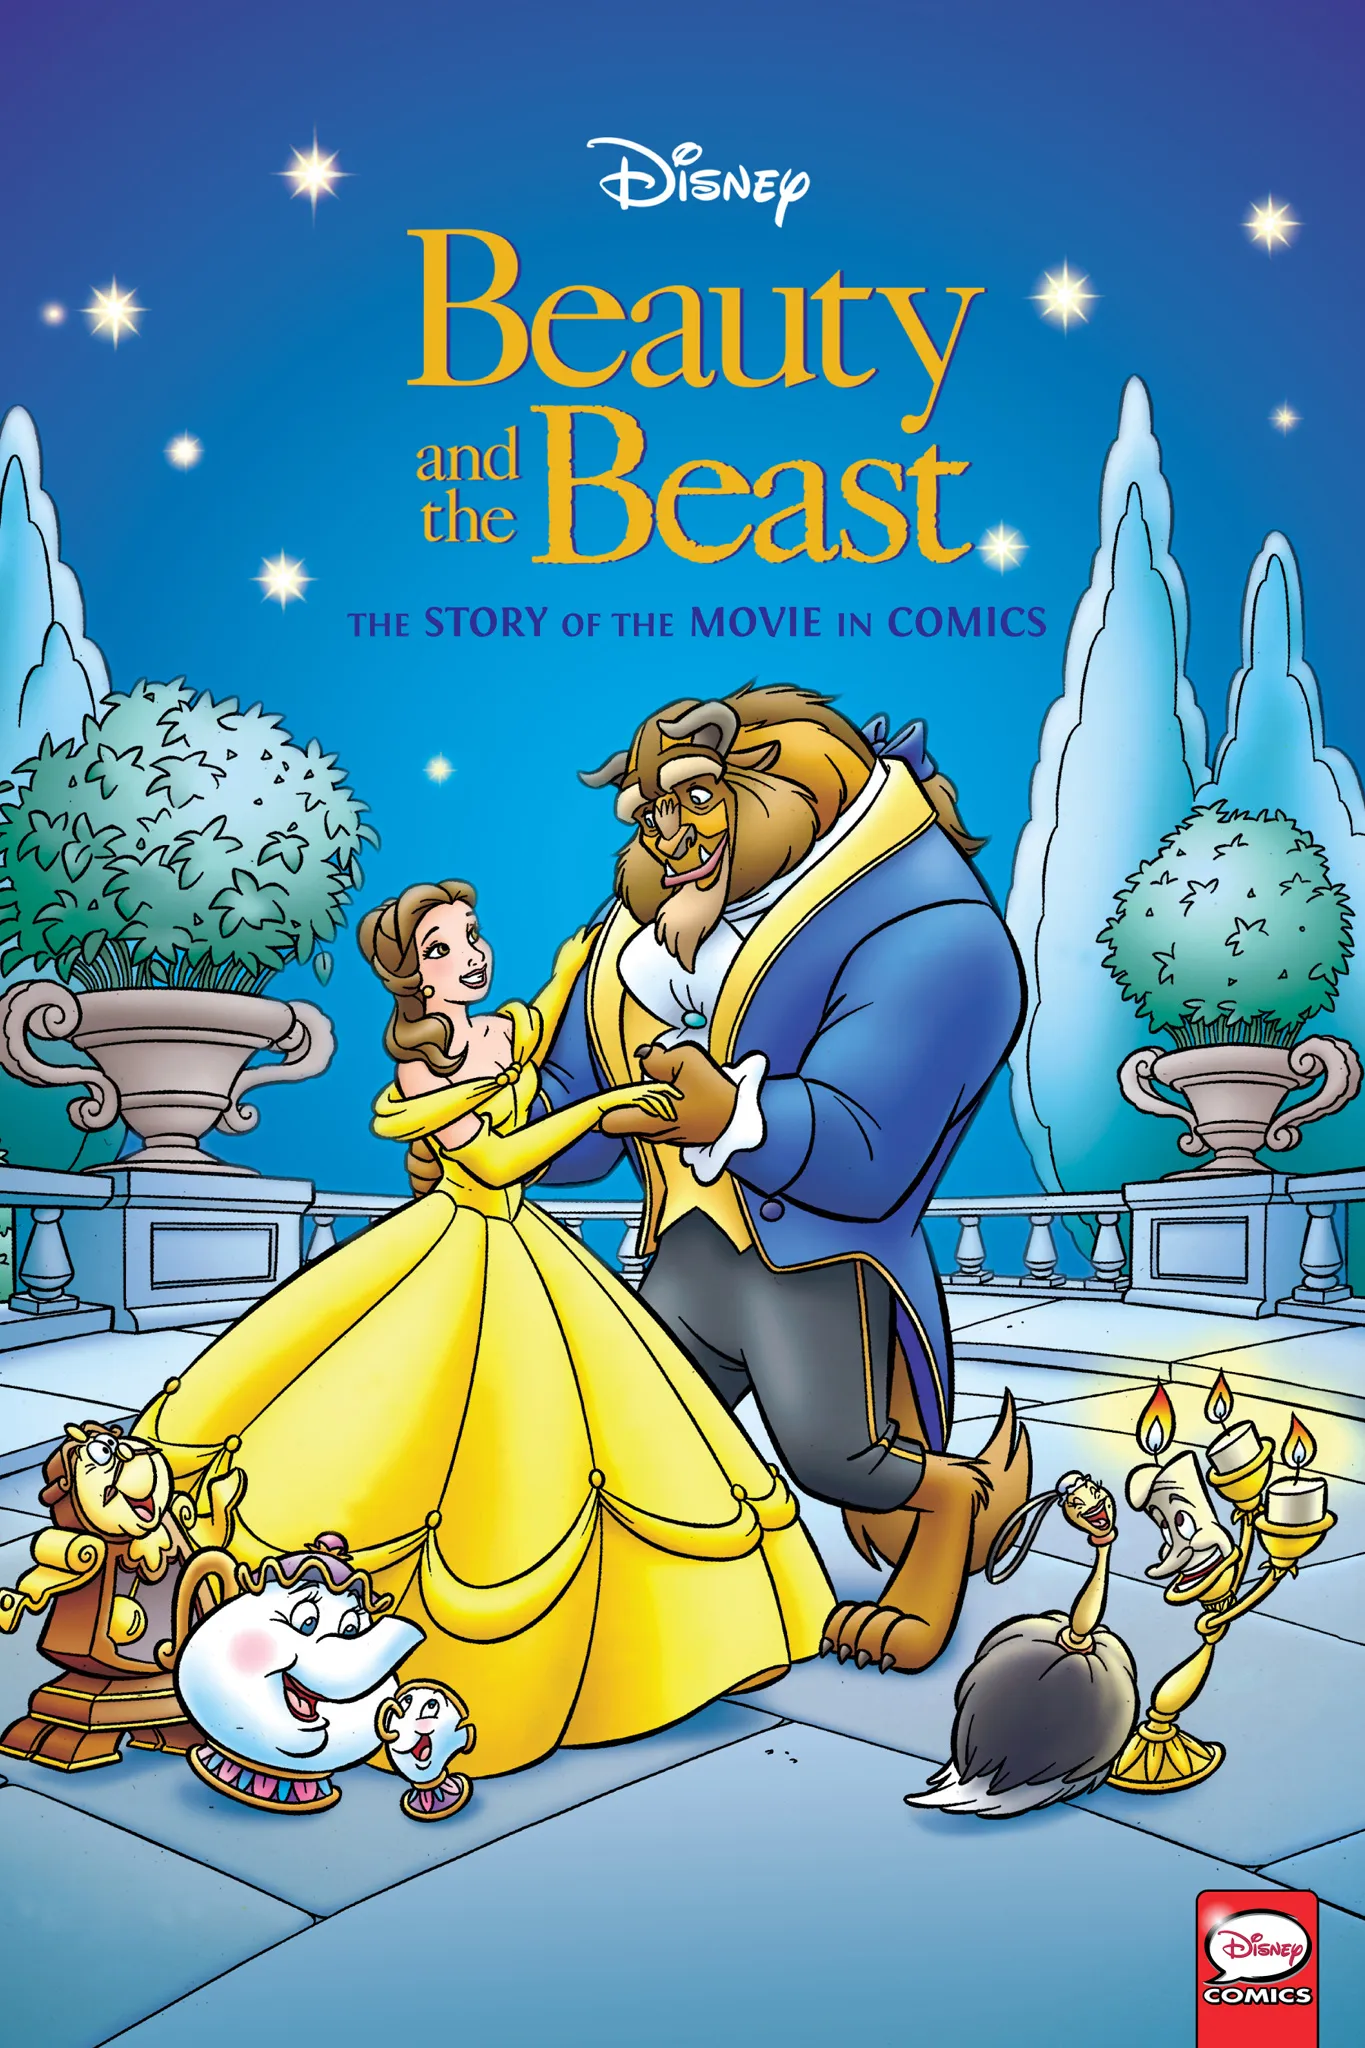 Disney Beauty and the Beast: The Story of the Movie in Comics (Disney Princesses)